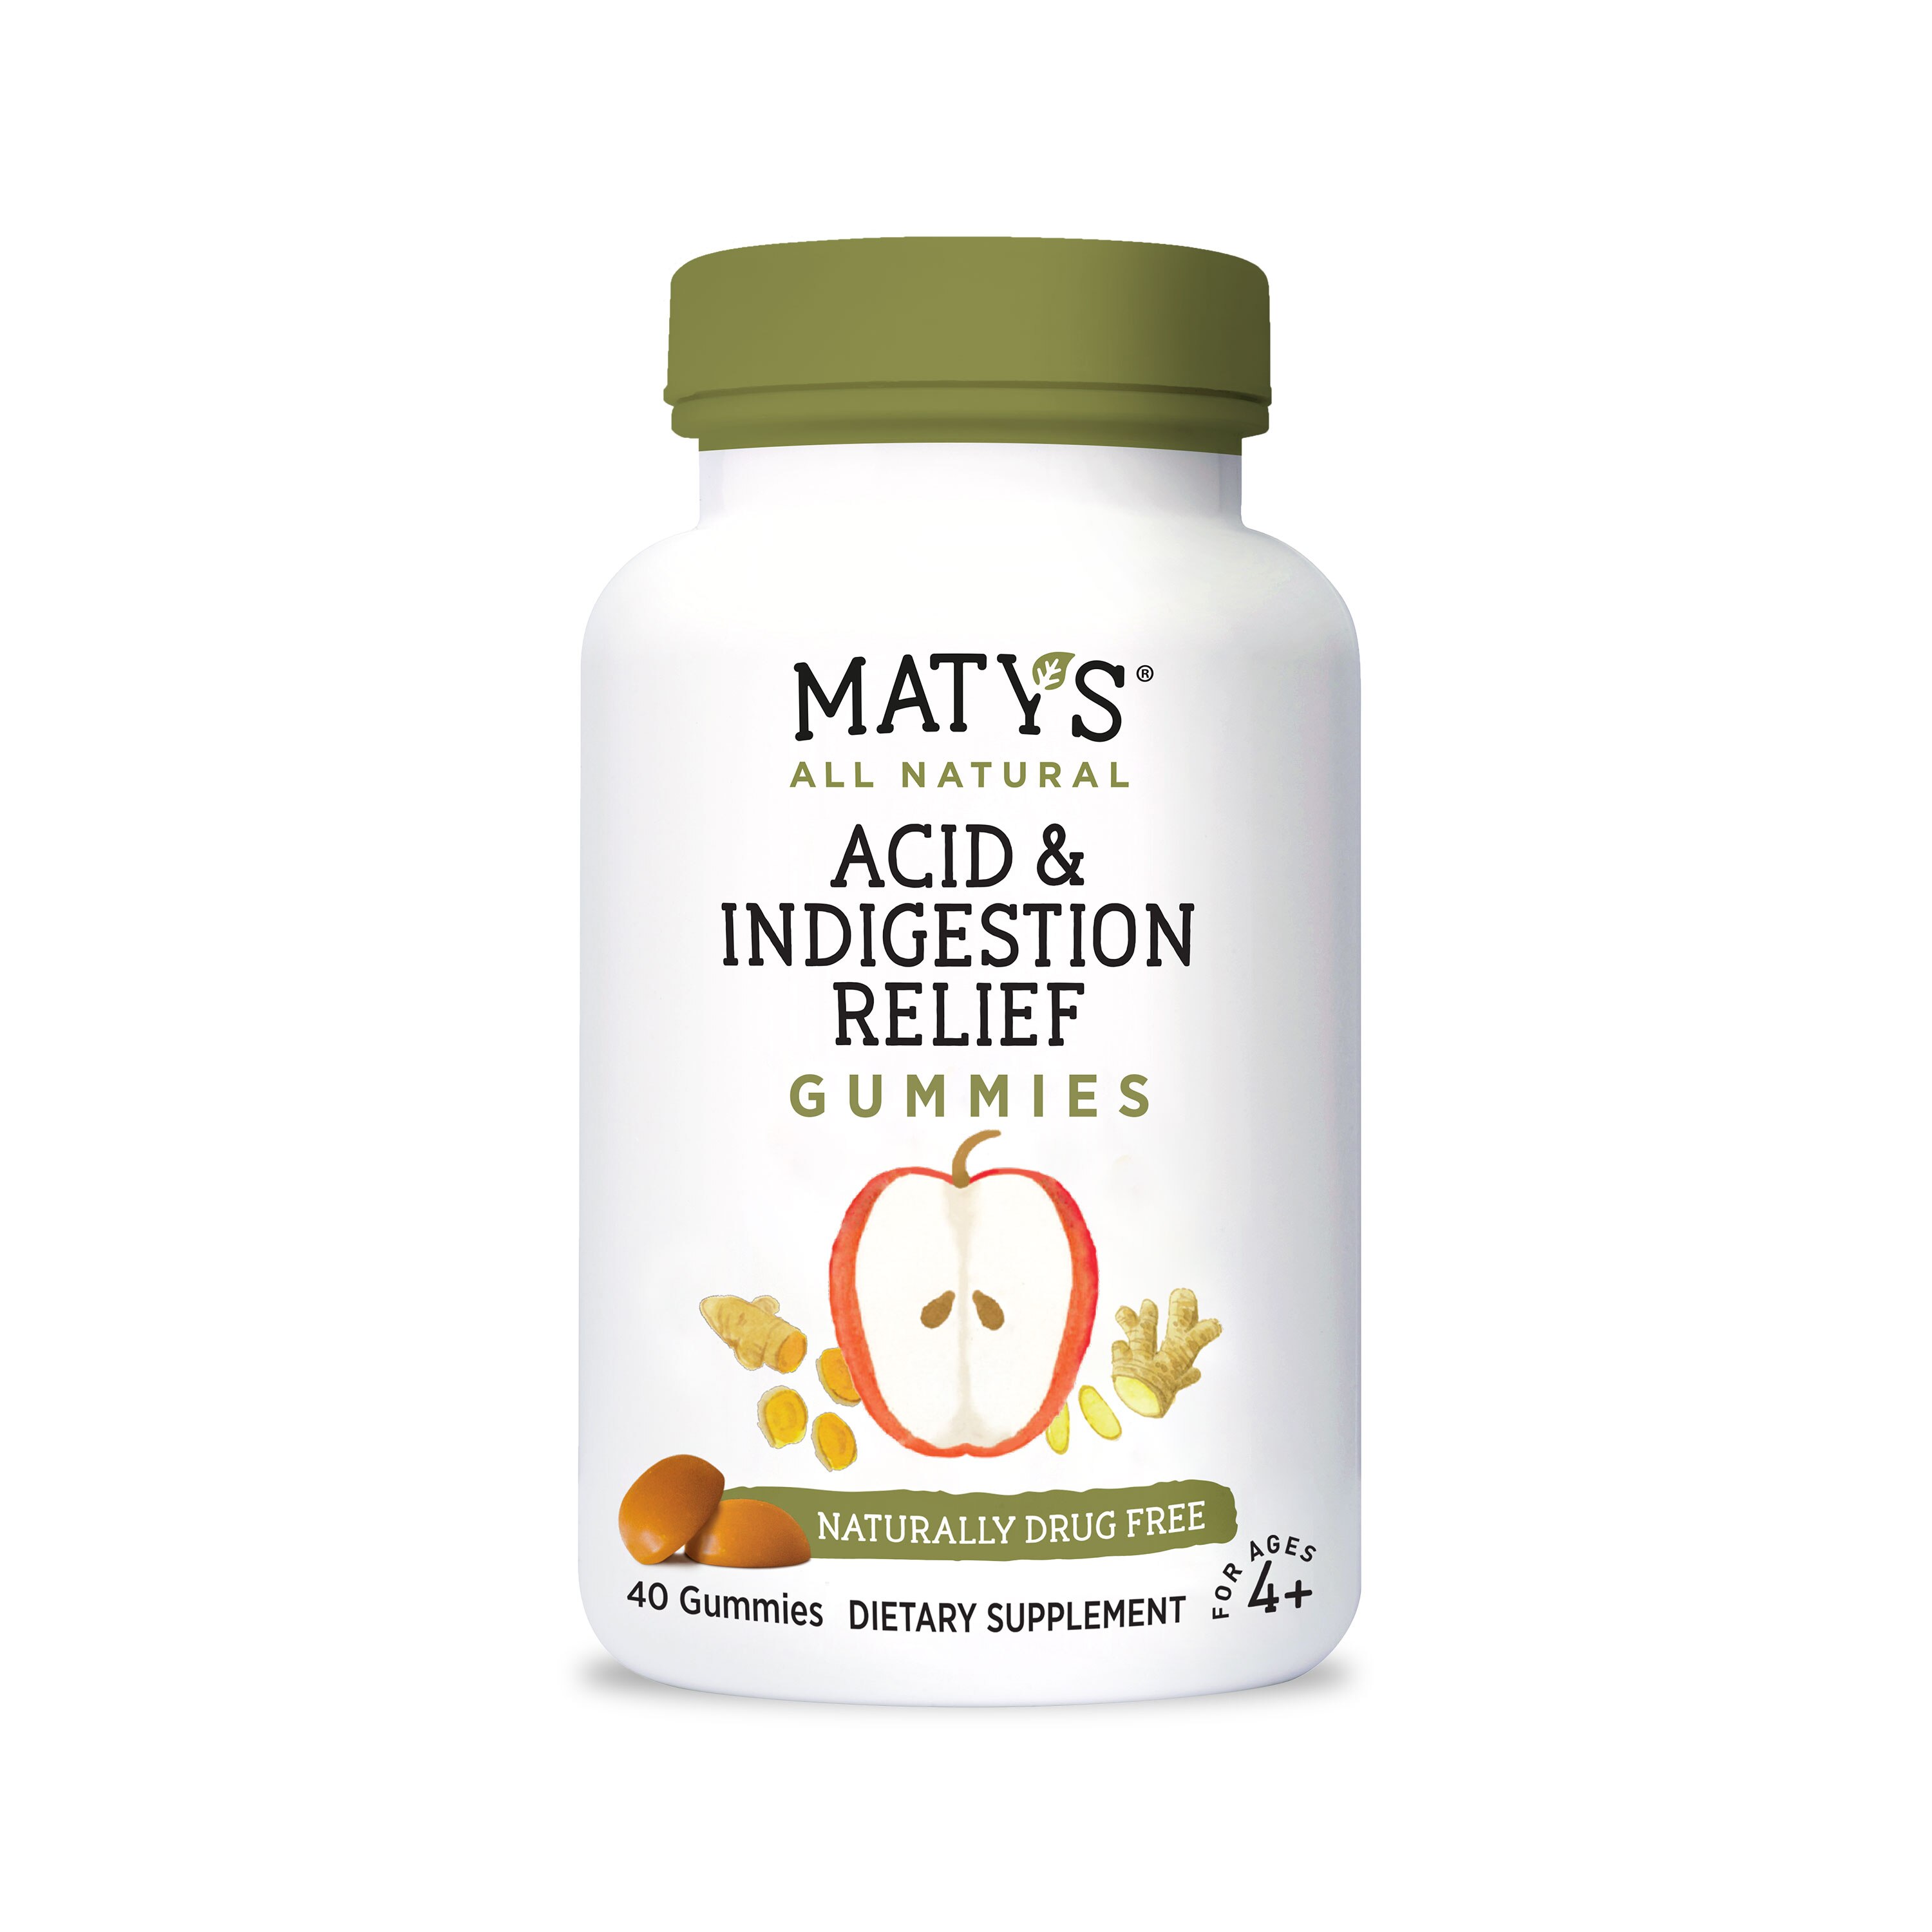 Maty's All Natural Acid & Indigestion Relief Gummies, Drug Free, 40 CT